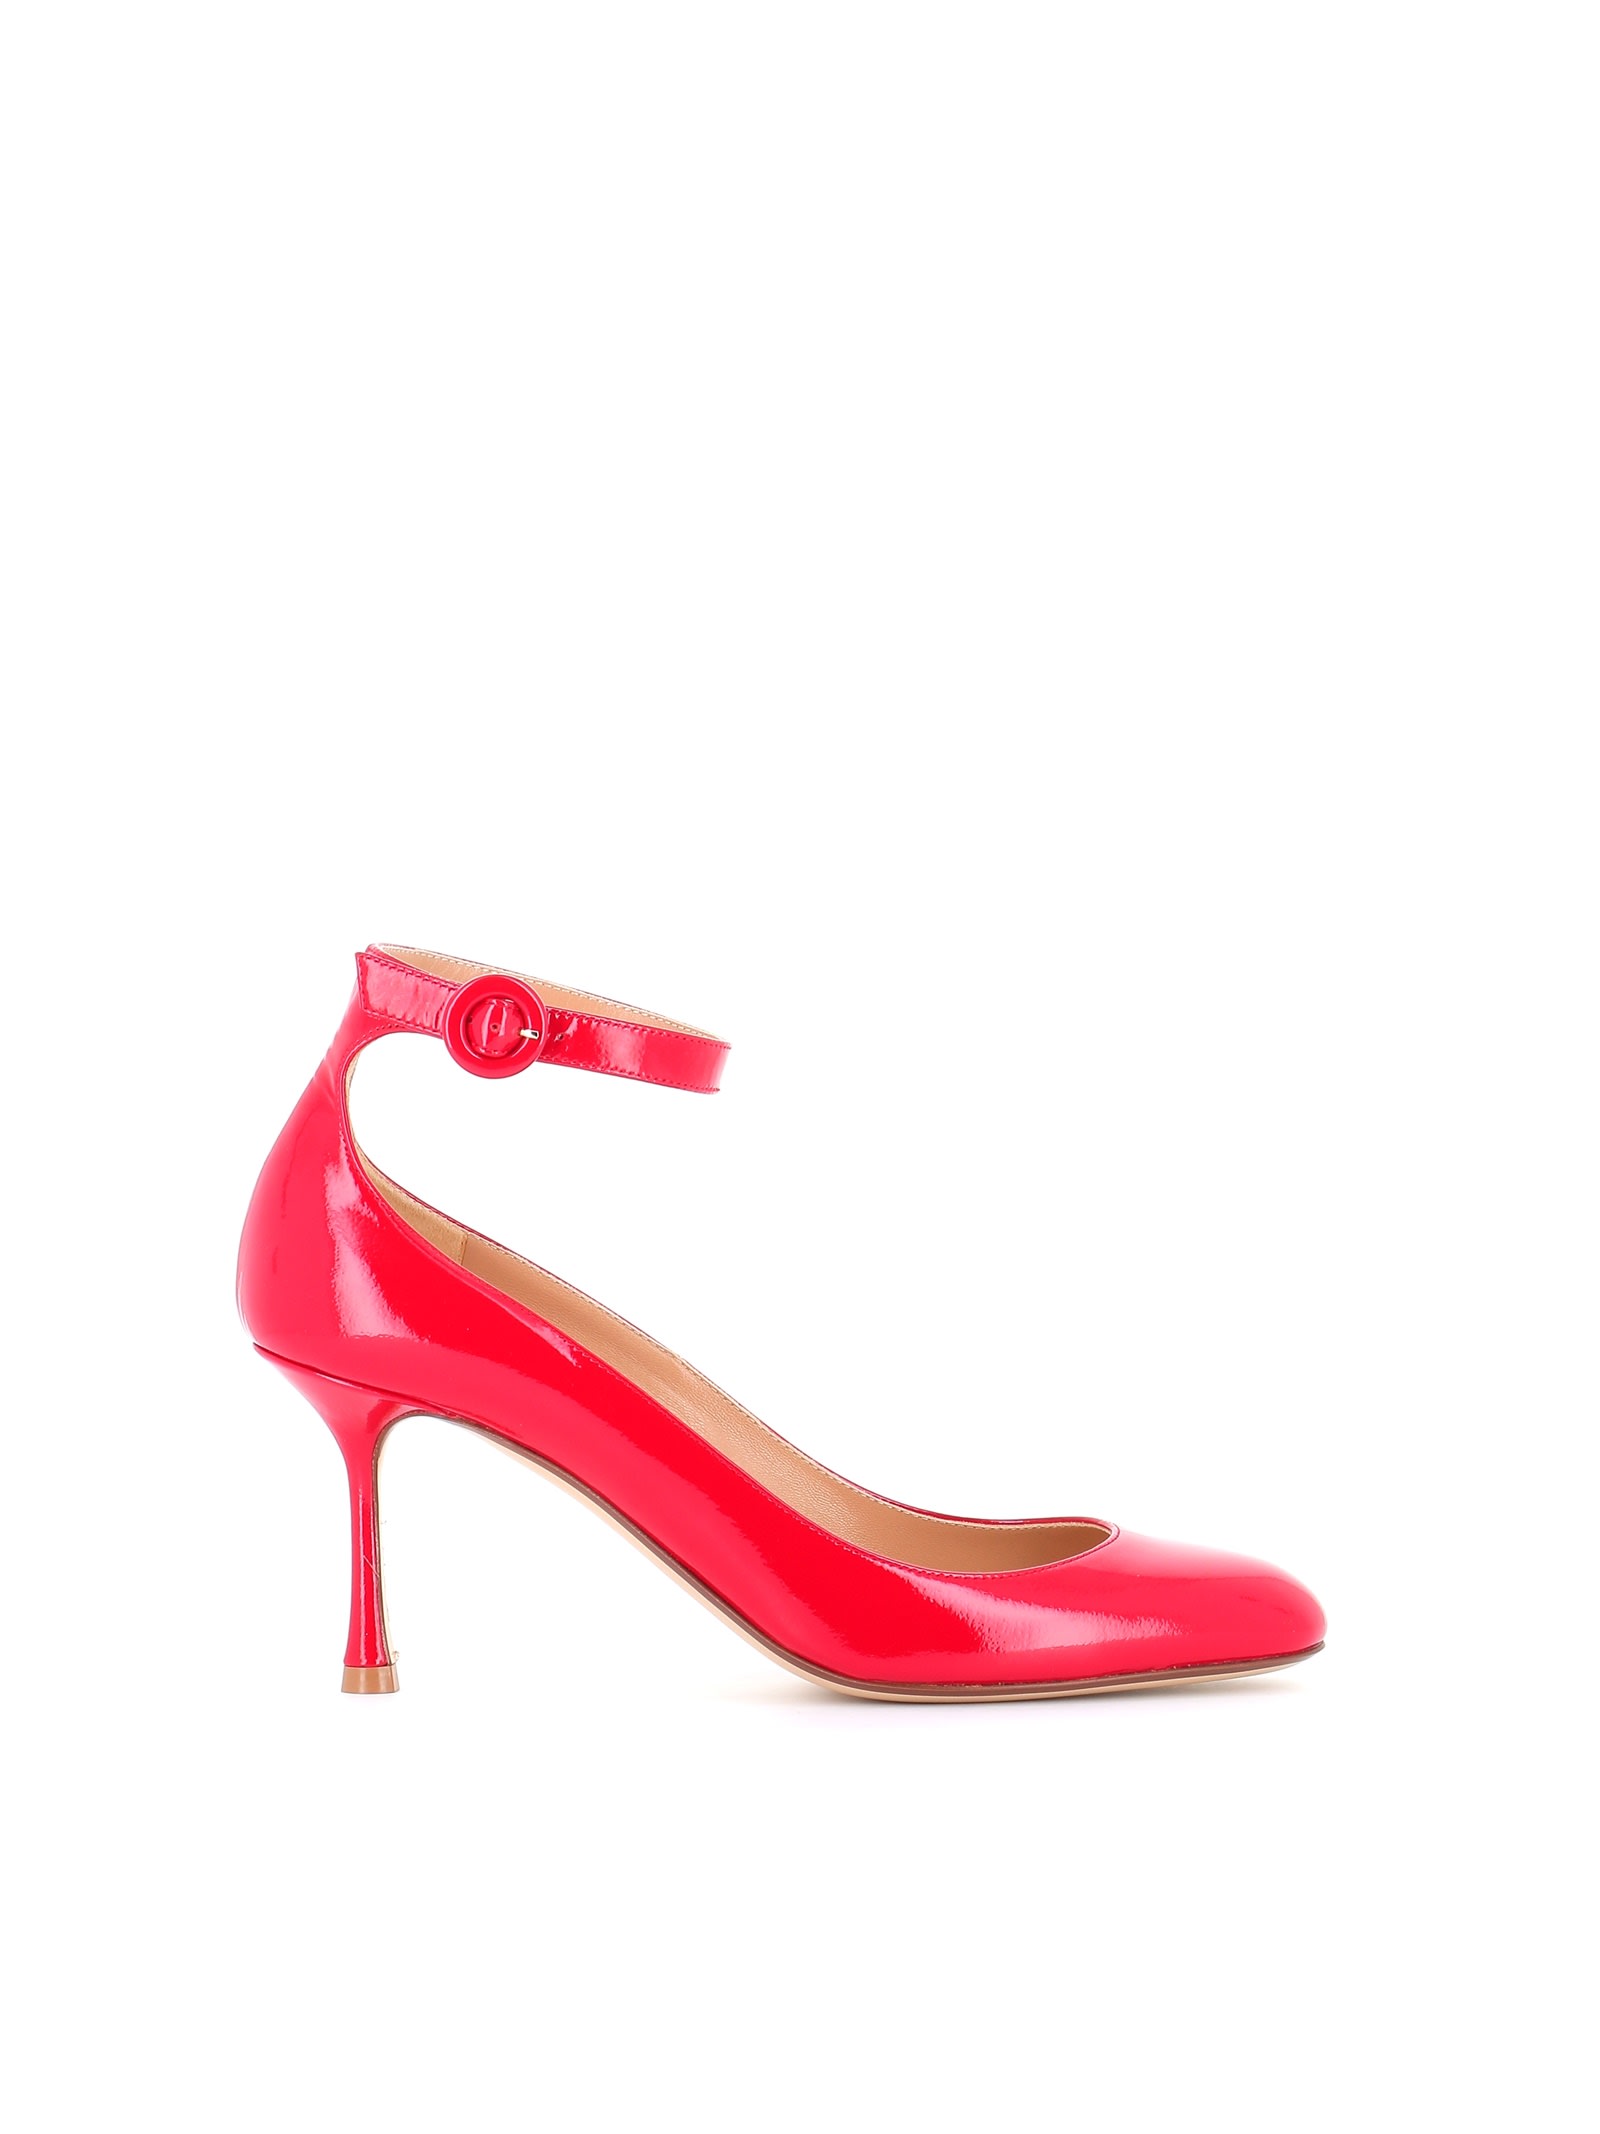 Buy Francesco Russo D?ollet?Fr35112a online, shop Francesco Russo shoes with free shipping